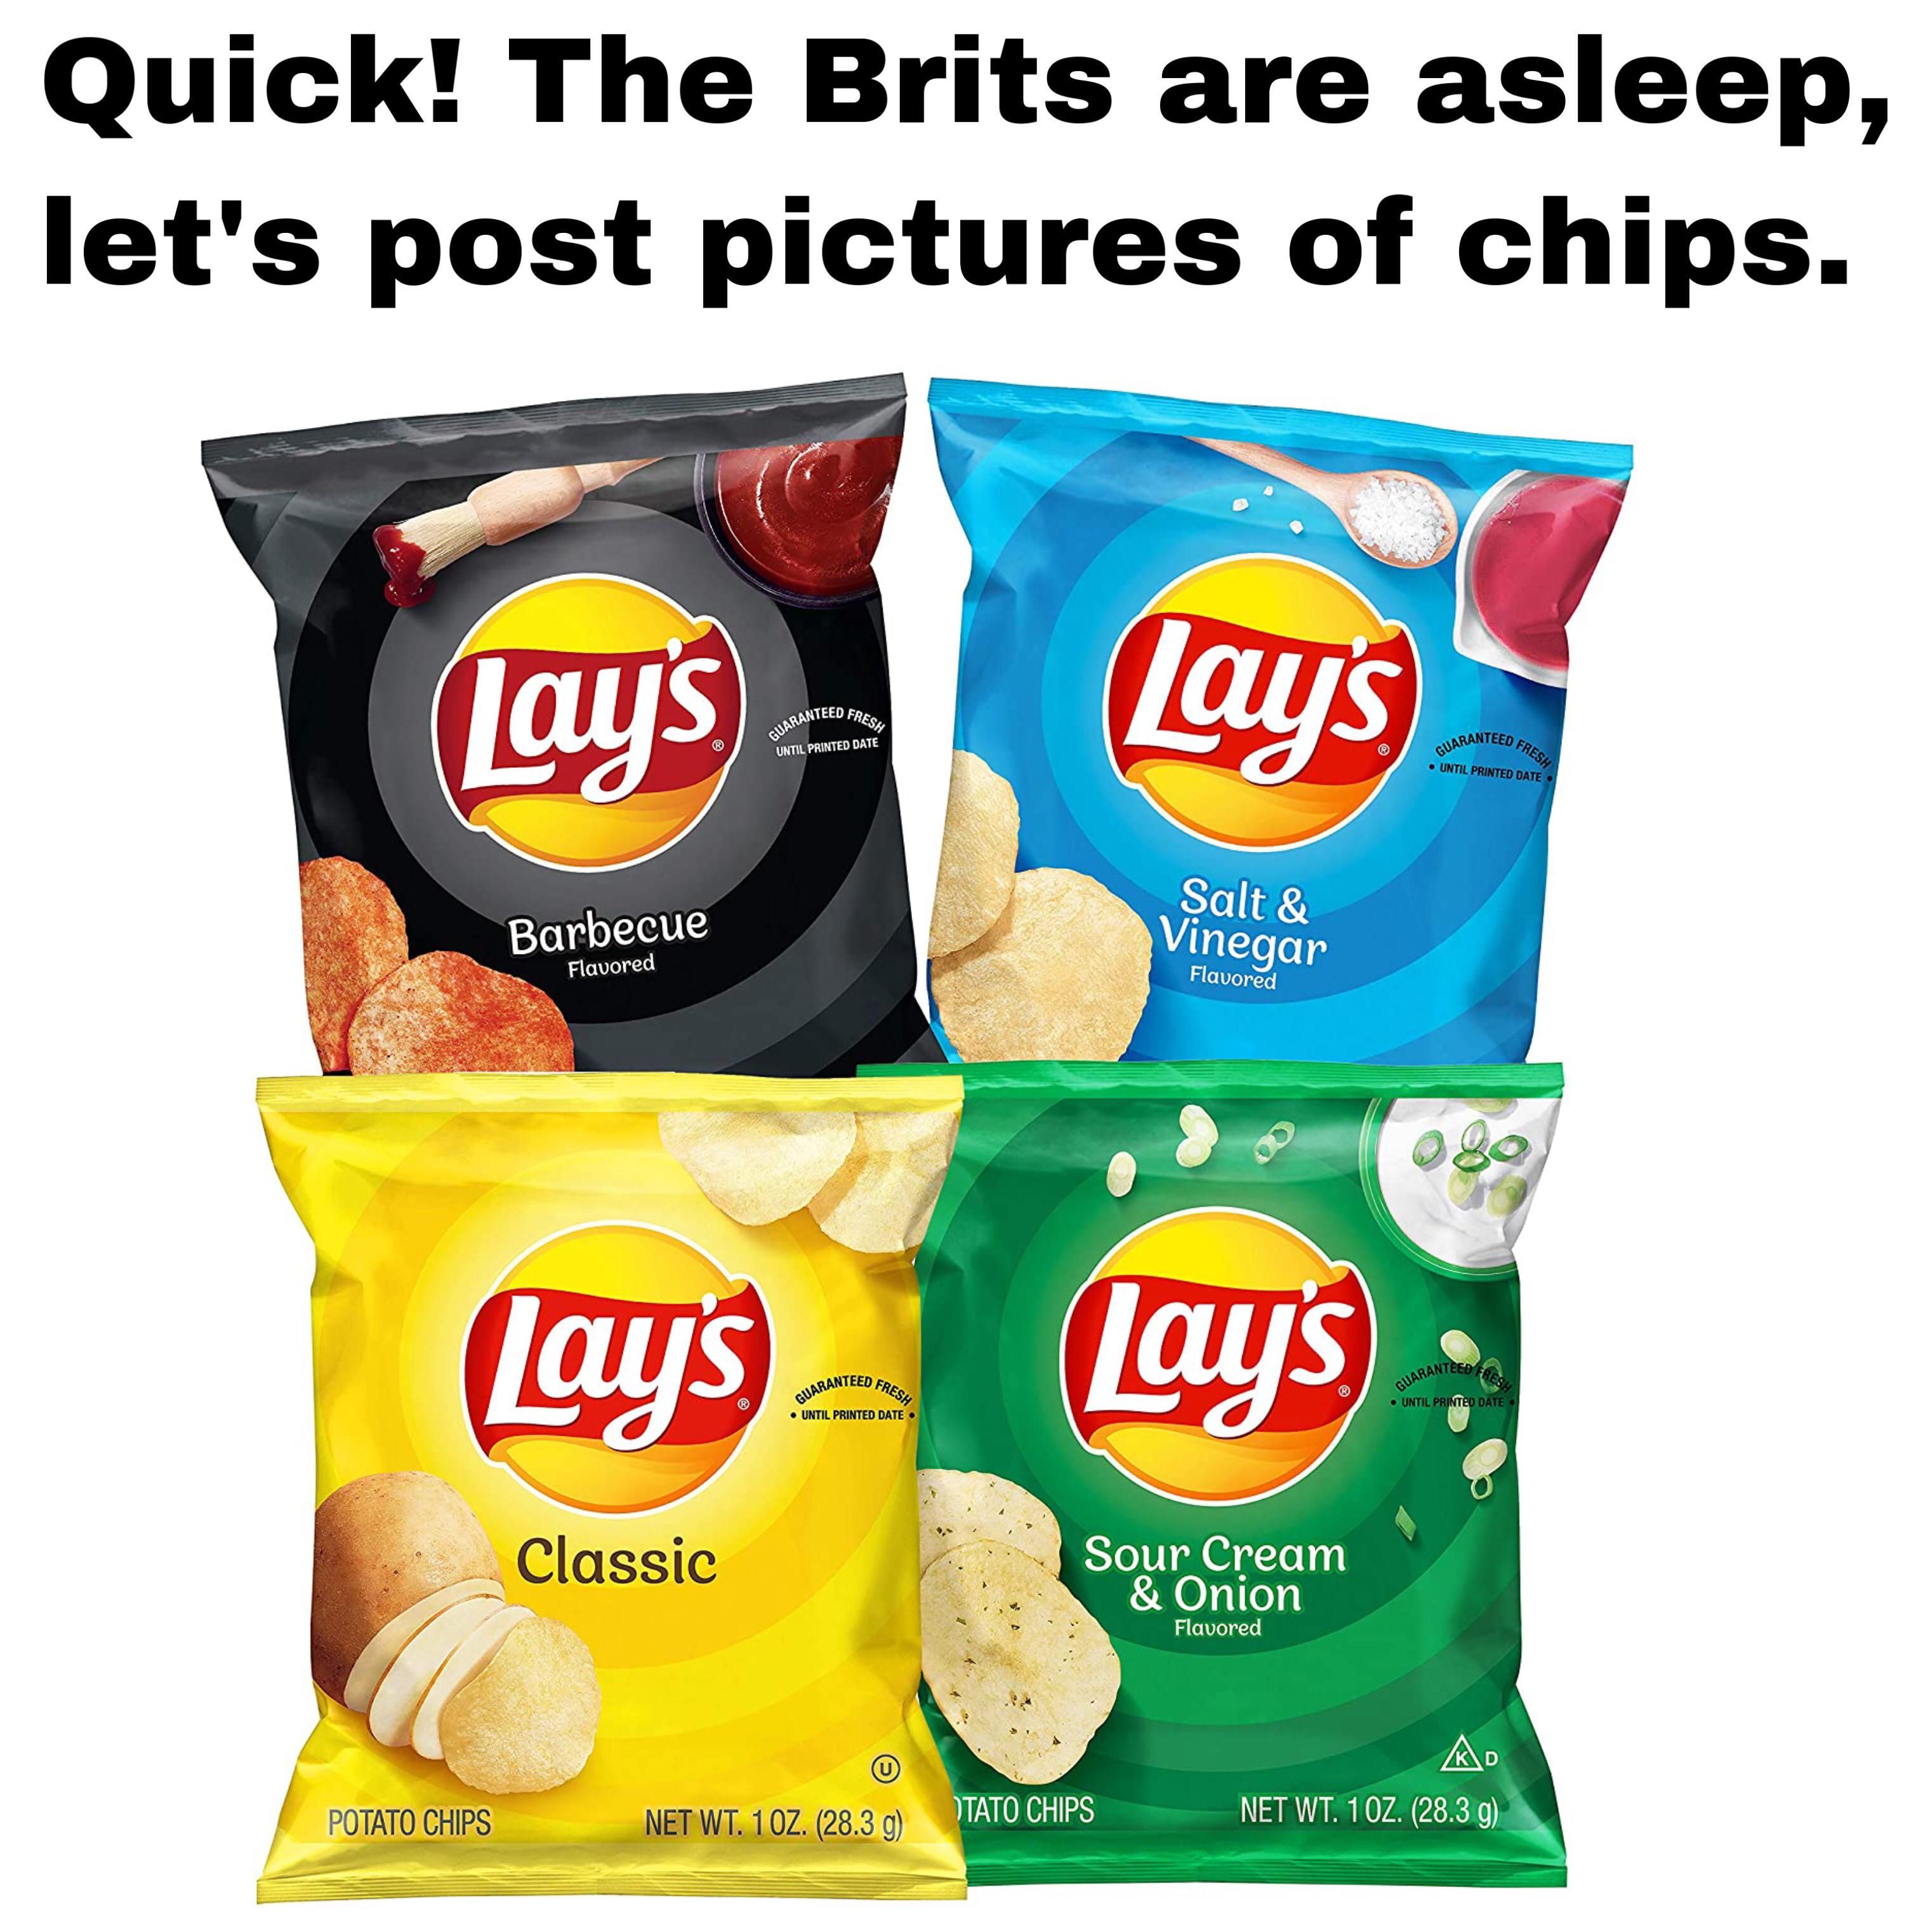 These are chips ok my British friends?